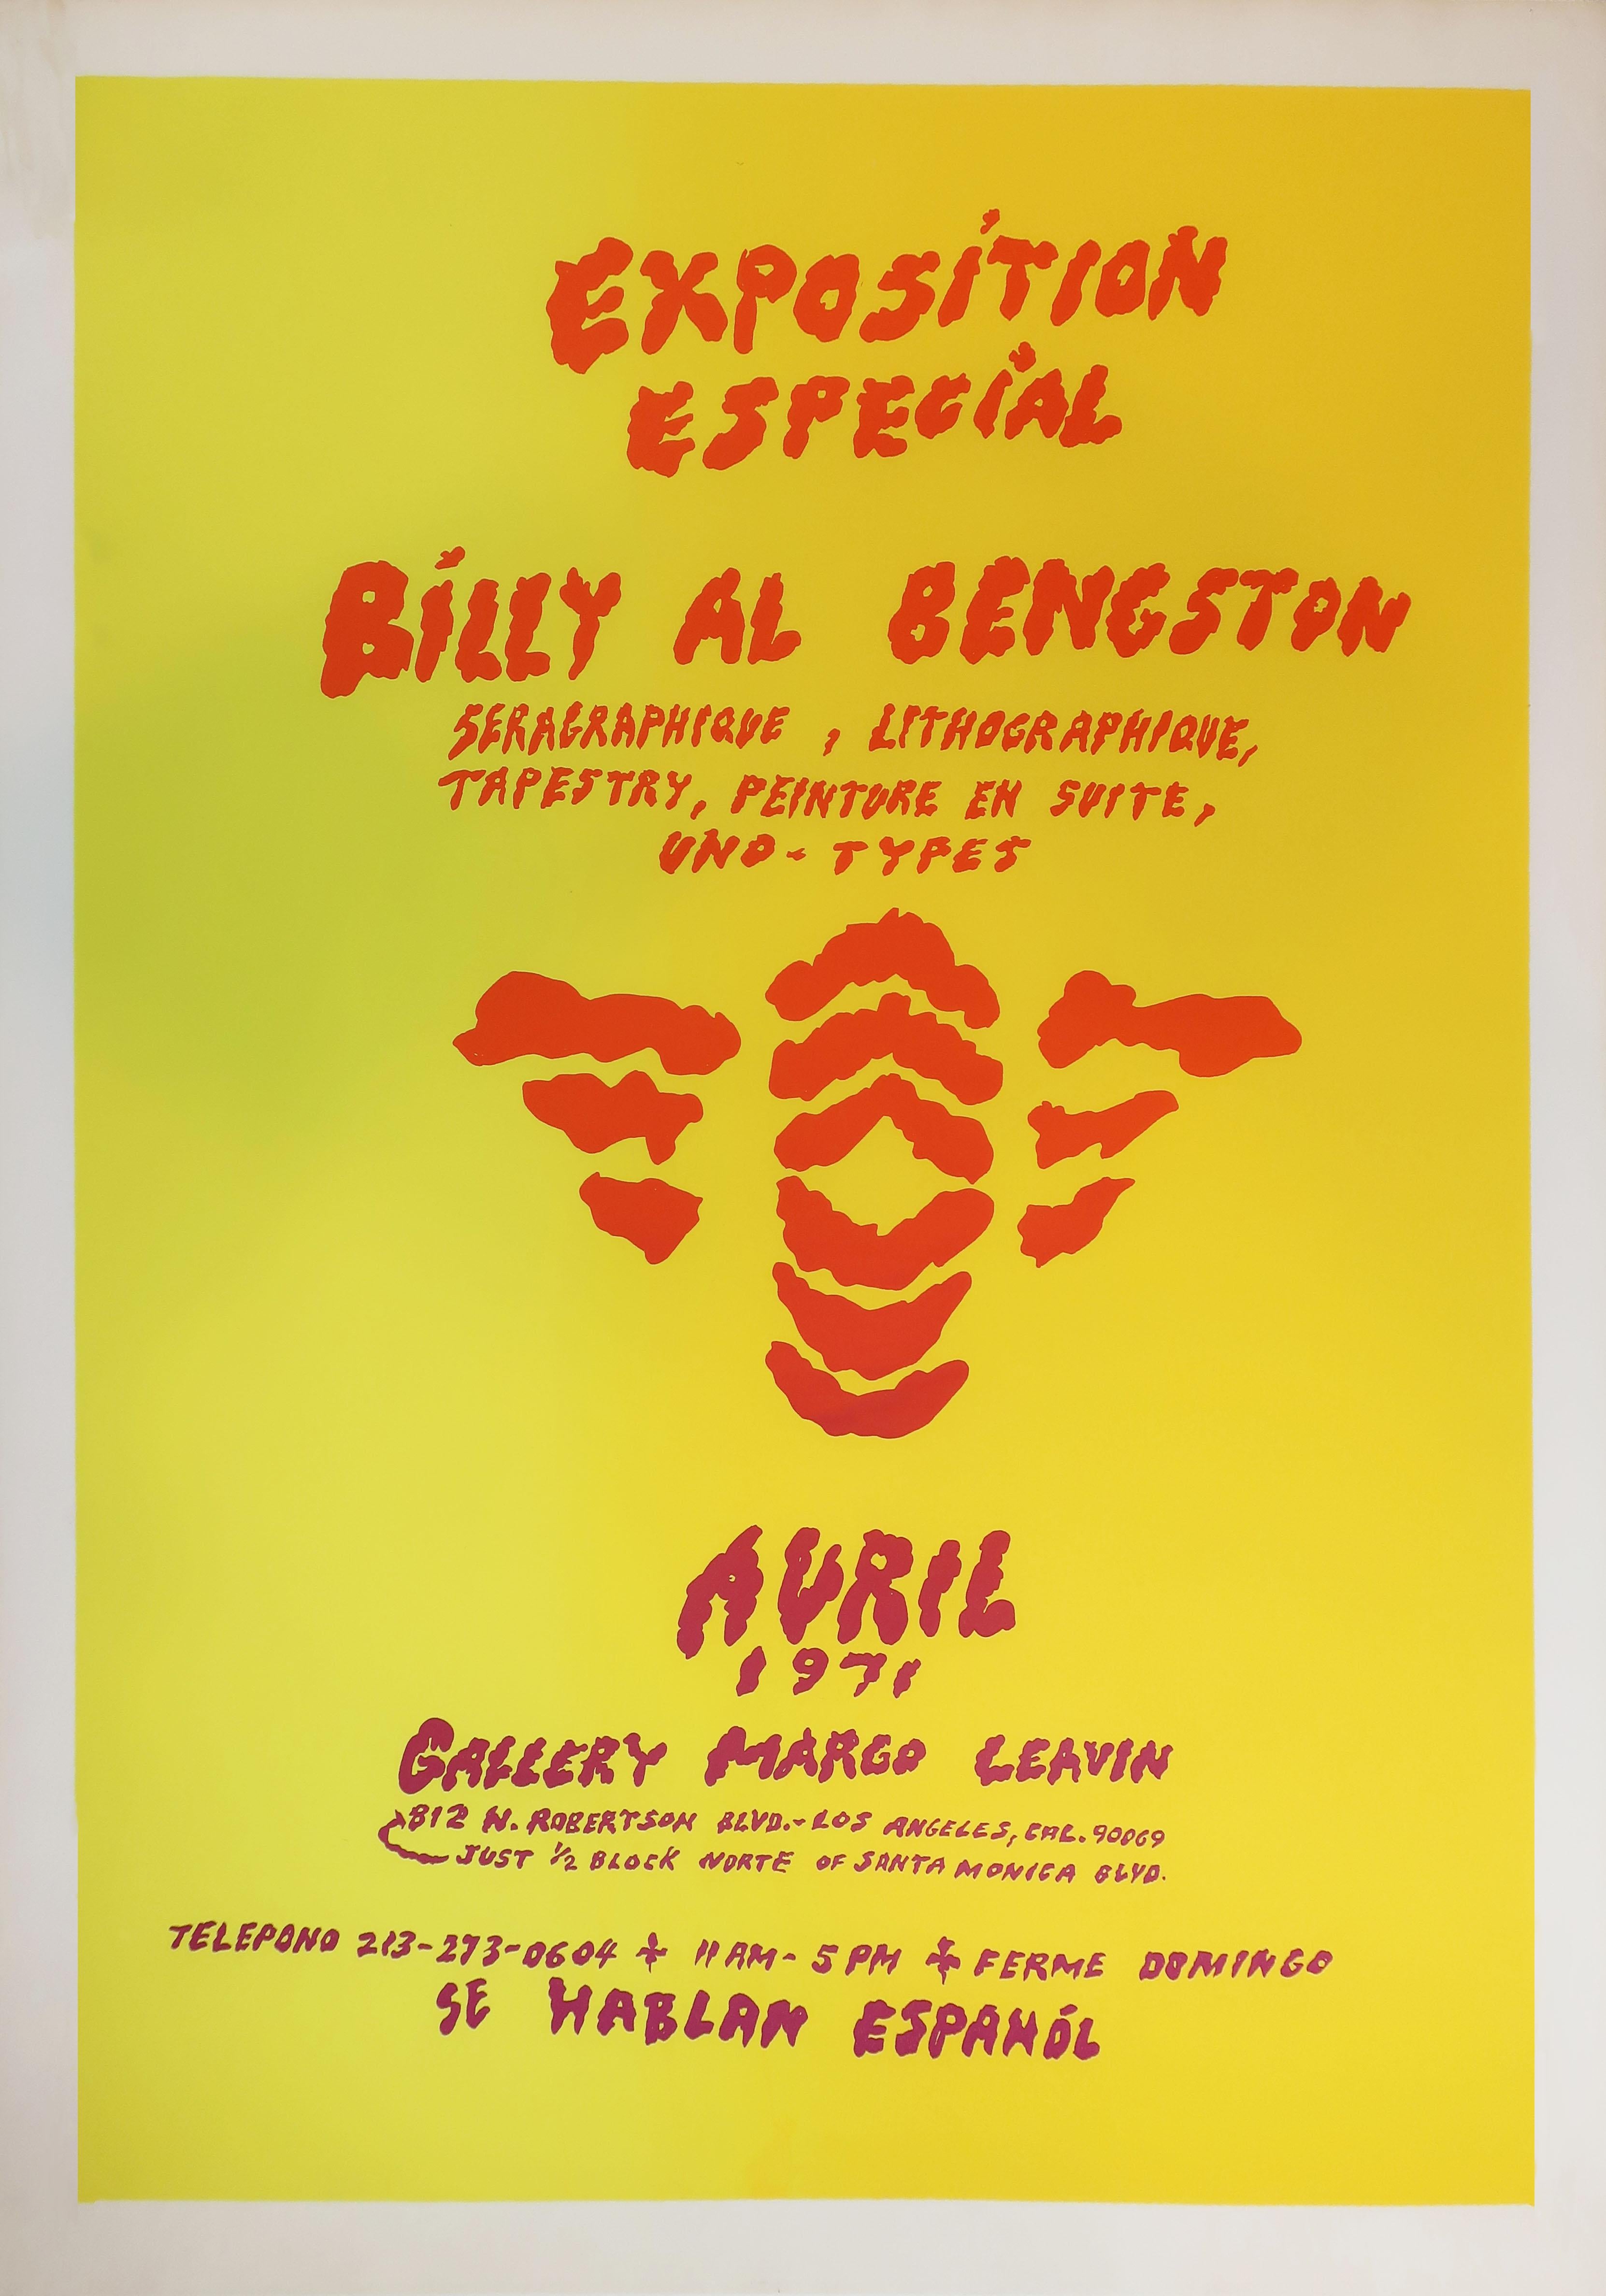 Billy Al Bengston Print - "Exposition Especial Seragraphique, Lithographique, Tapestray"